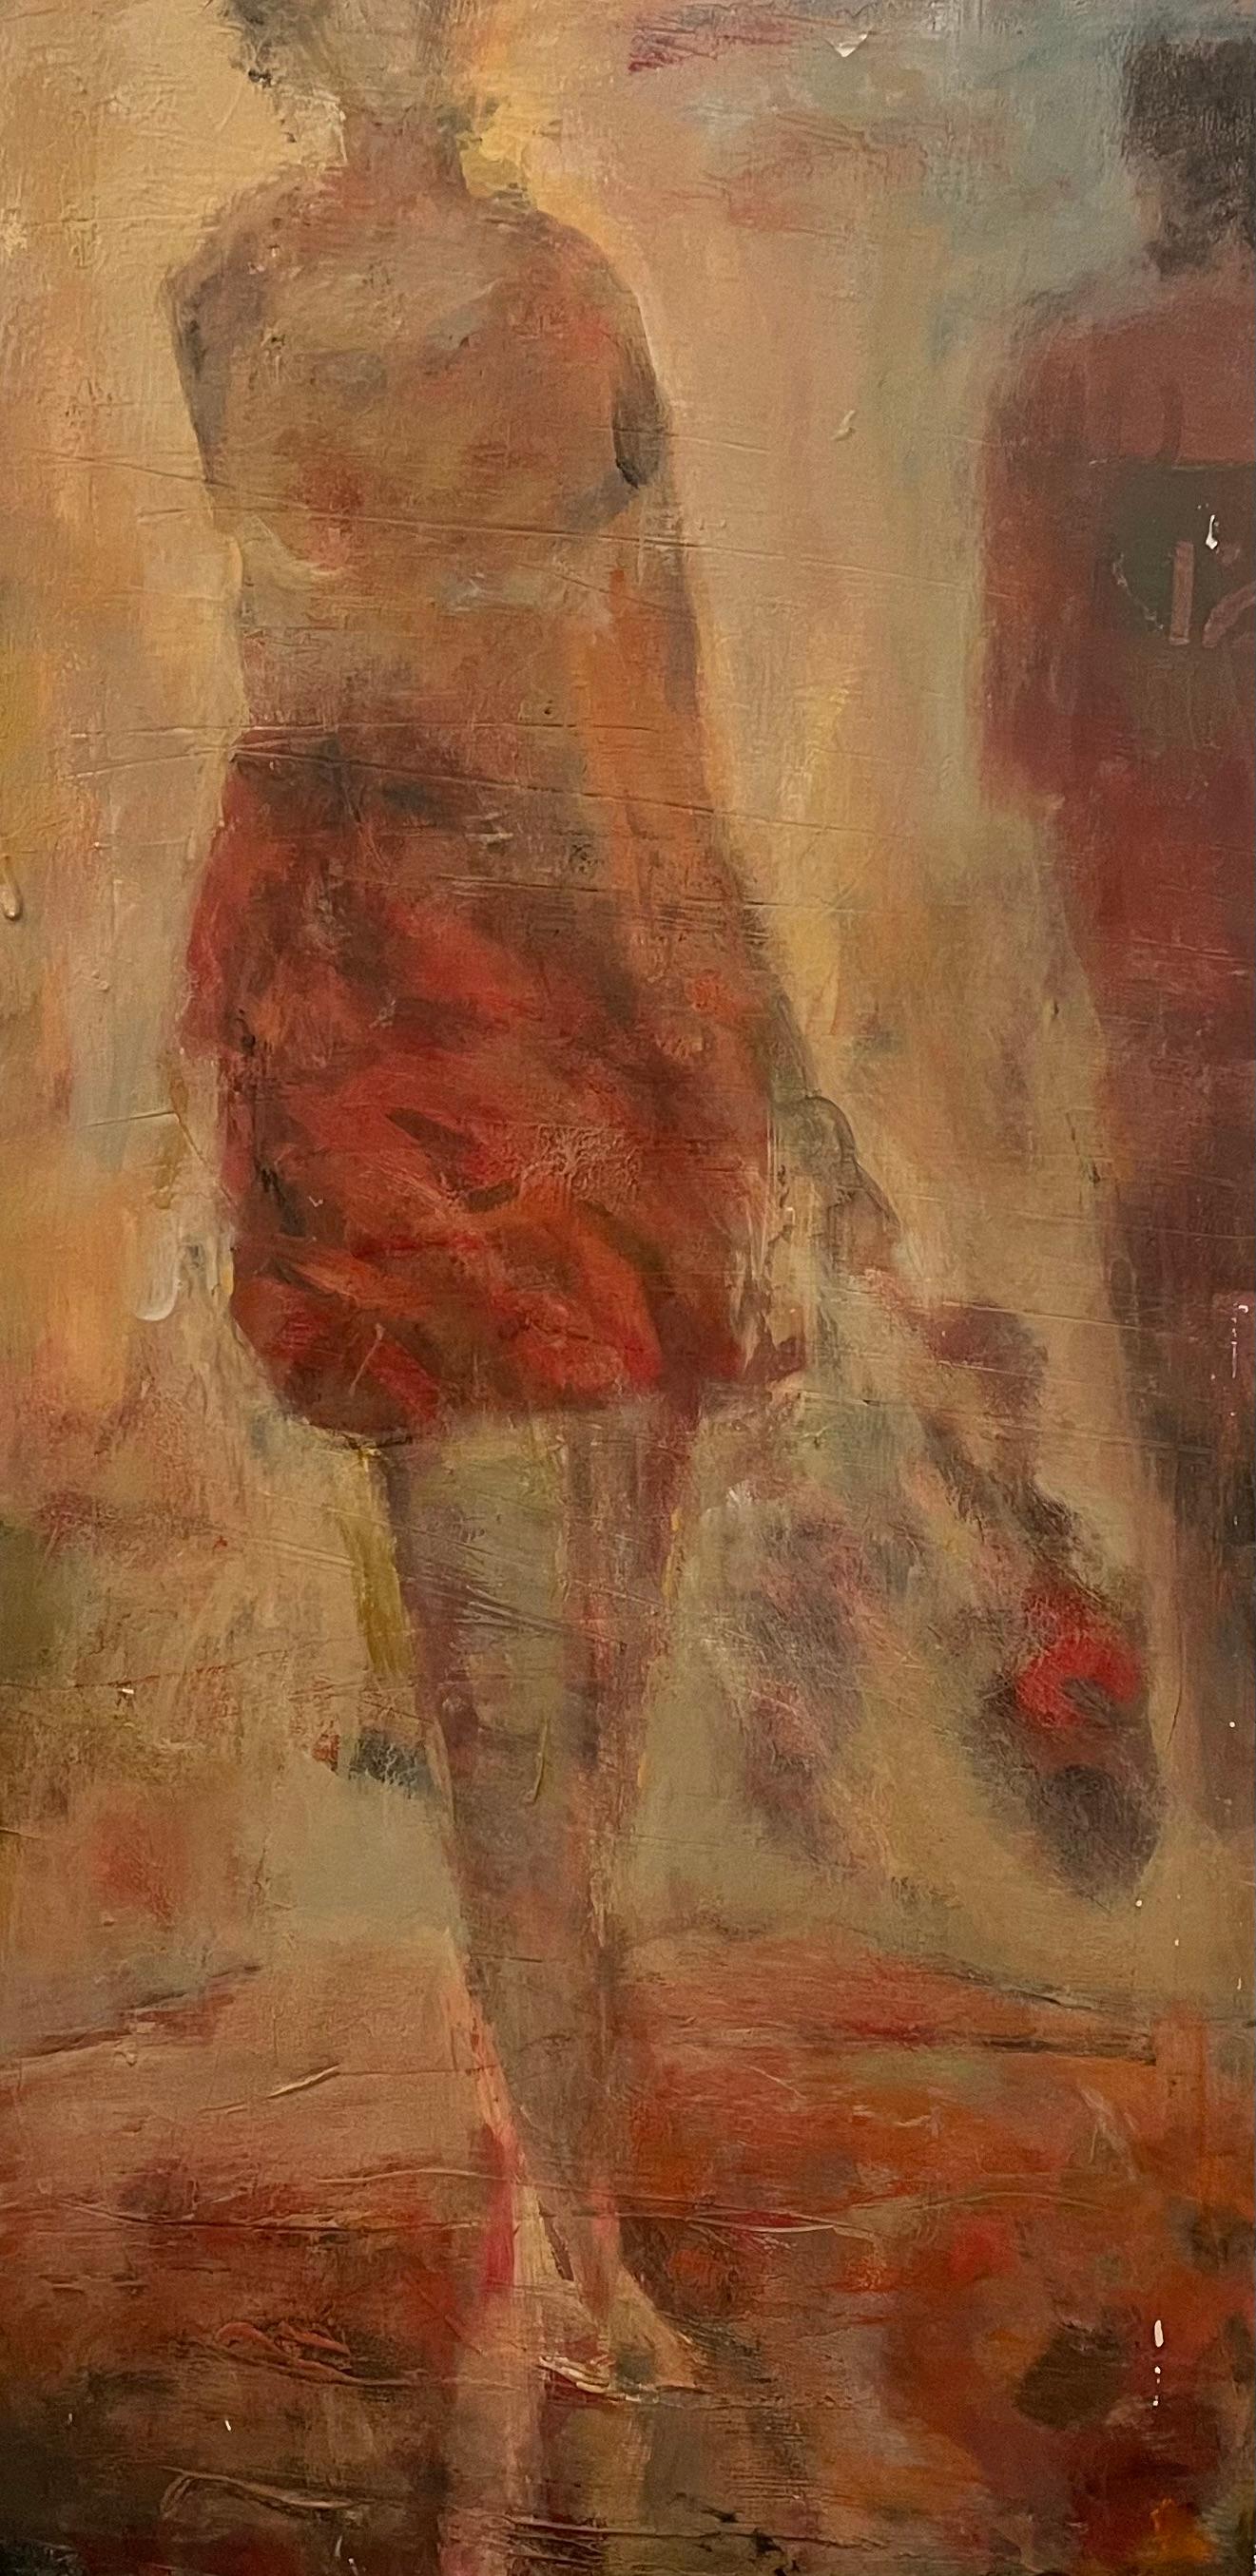 Helen Steele Figurative Painting - "In Passing" Contemporary Figurative Abstract Expressionist